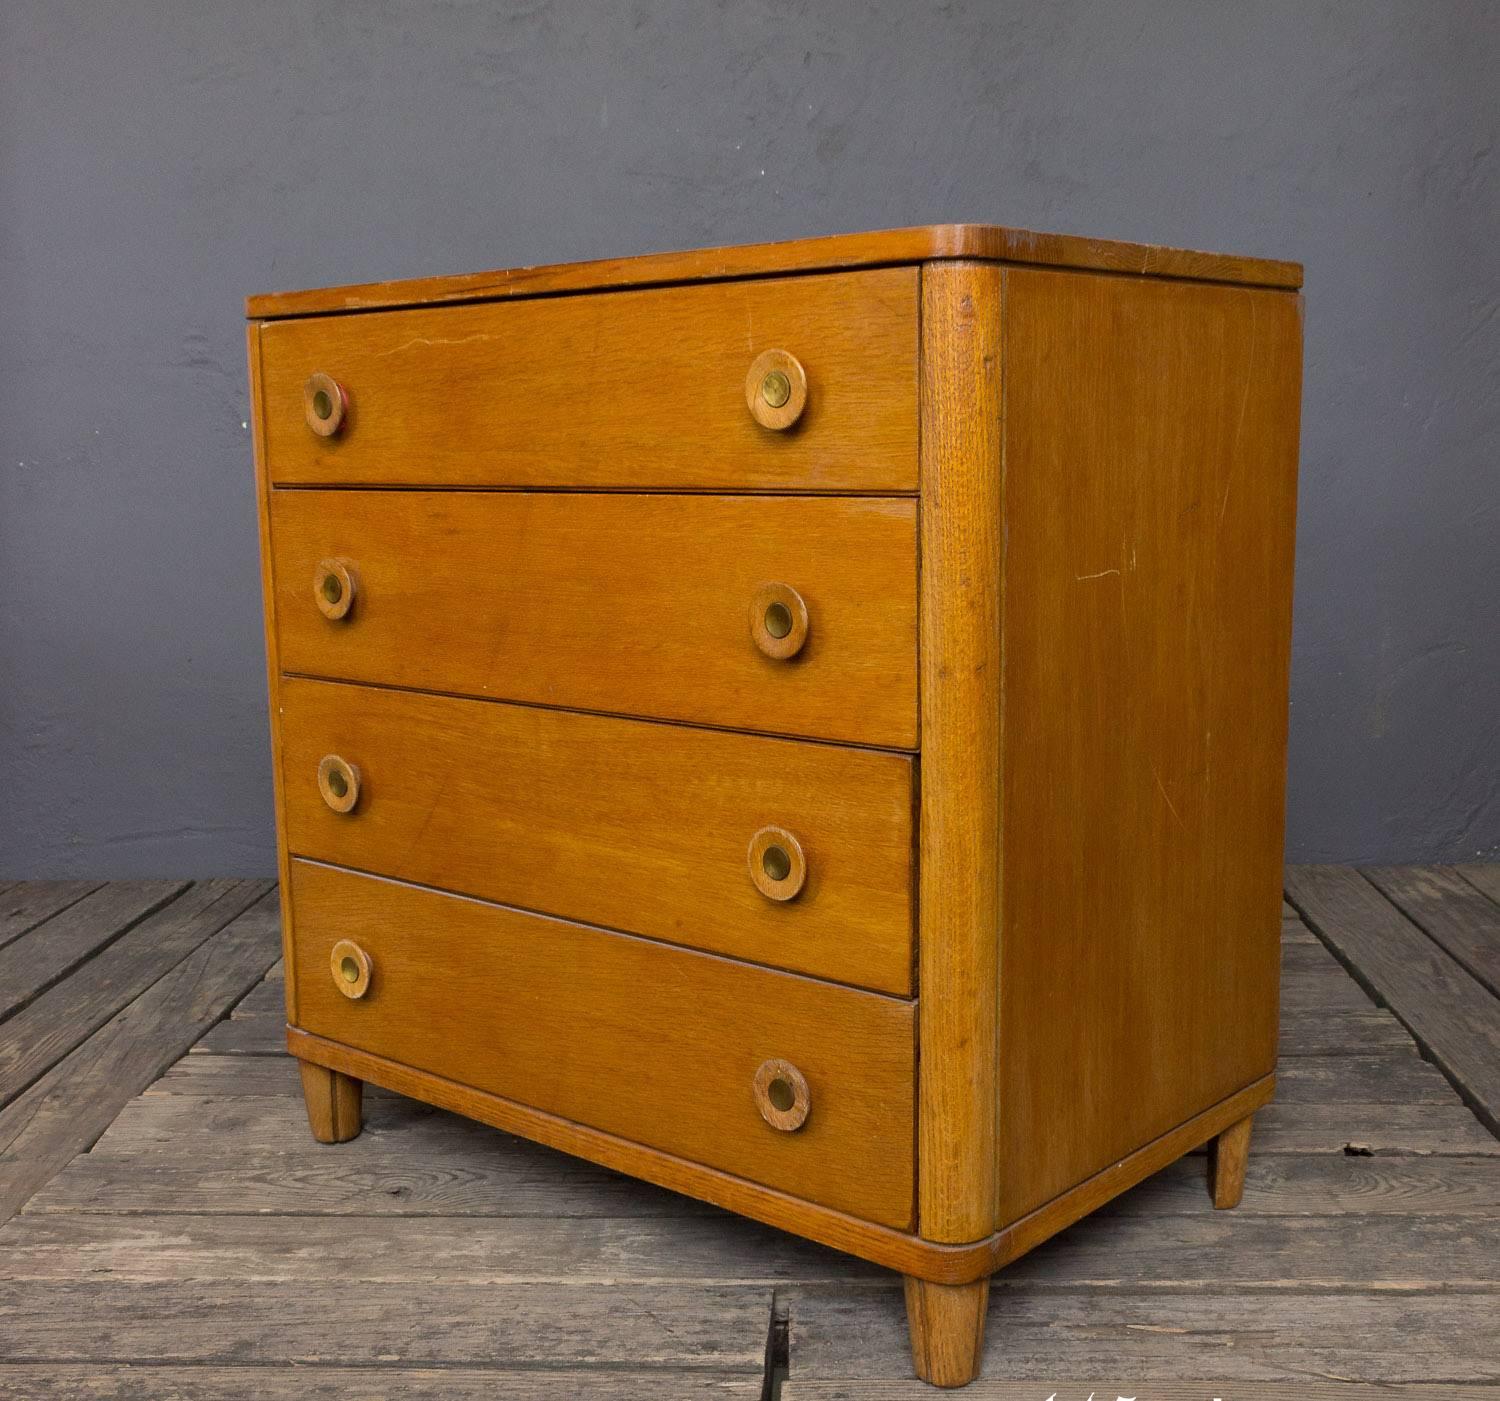 American 1940s oak cheese of drawers with original hardware. This piece is very well made, but is need of a polishing.